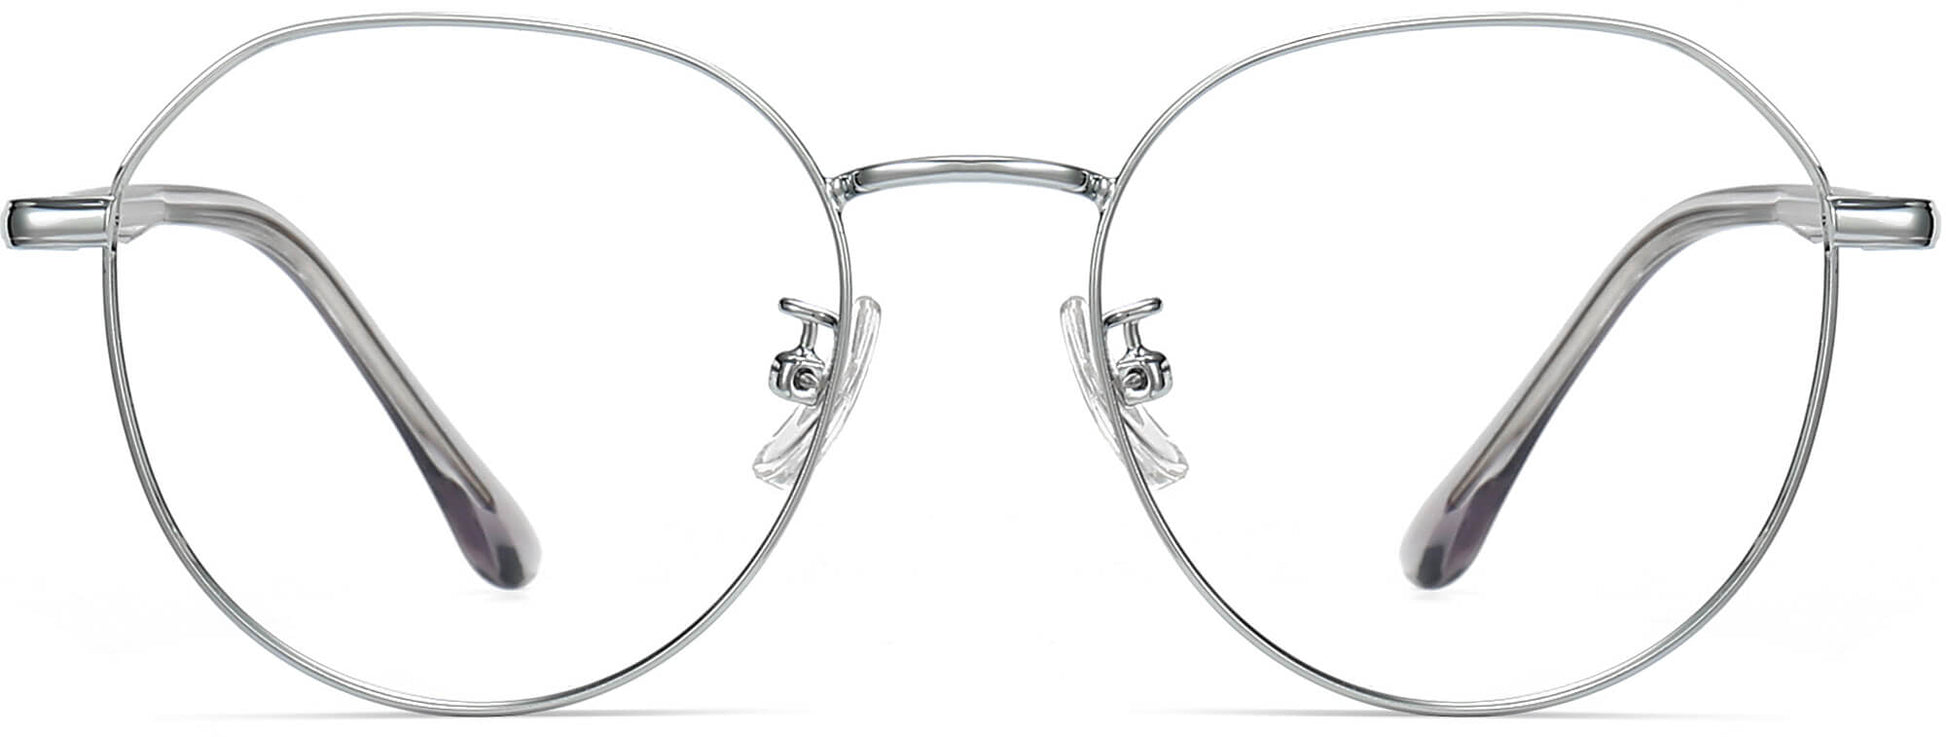 Cannon Round Silver Eyeglasses from ANRRI, front view